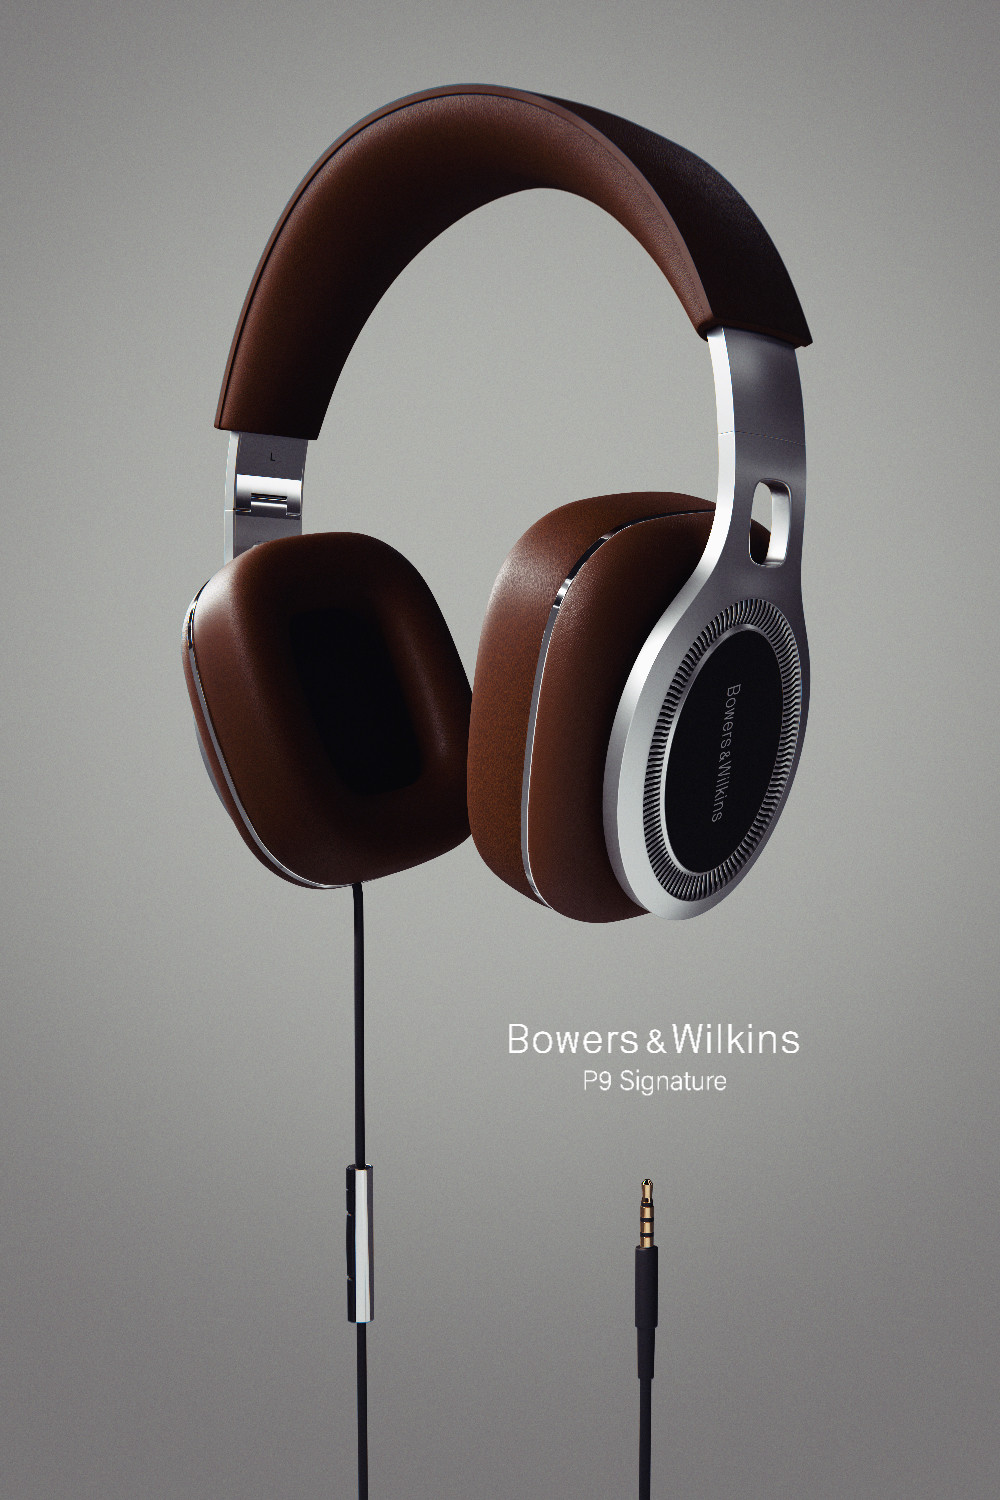 Hannah McCall - Bowers and Wilkins P9 Signature